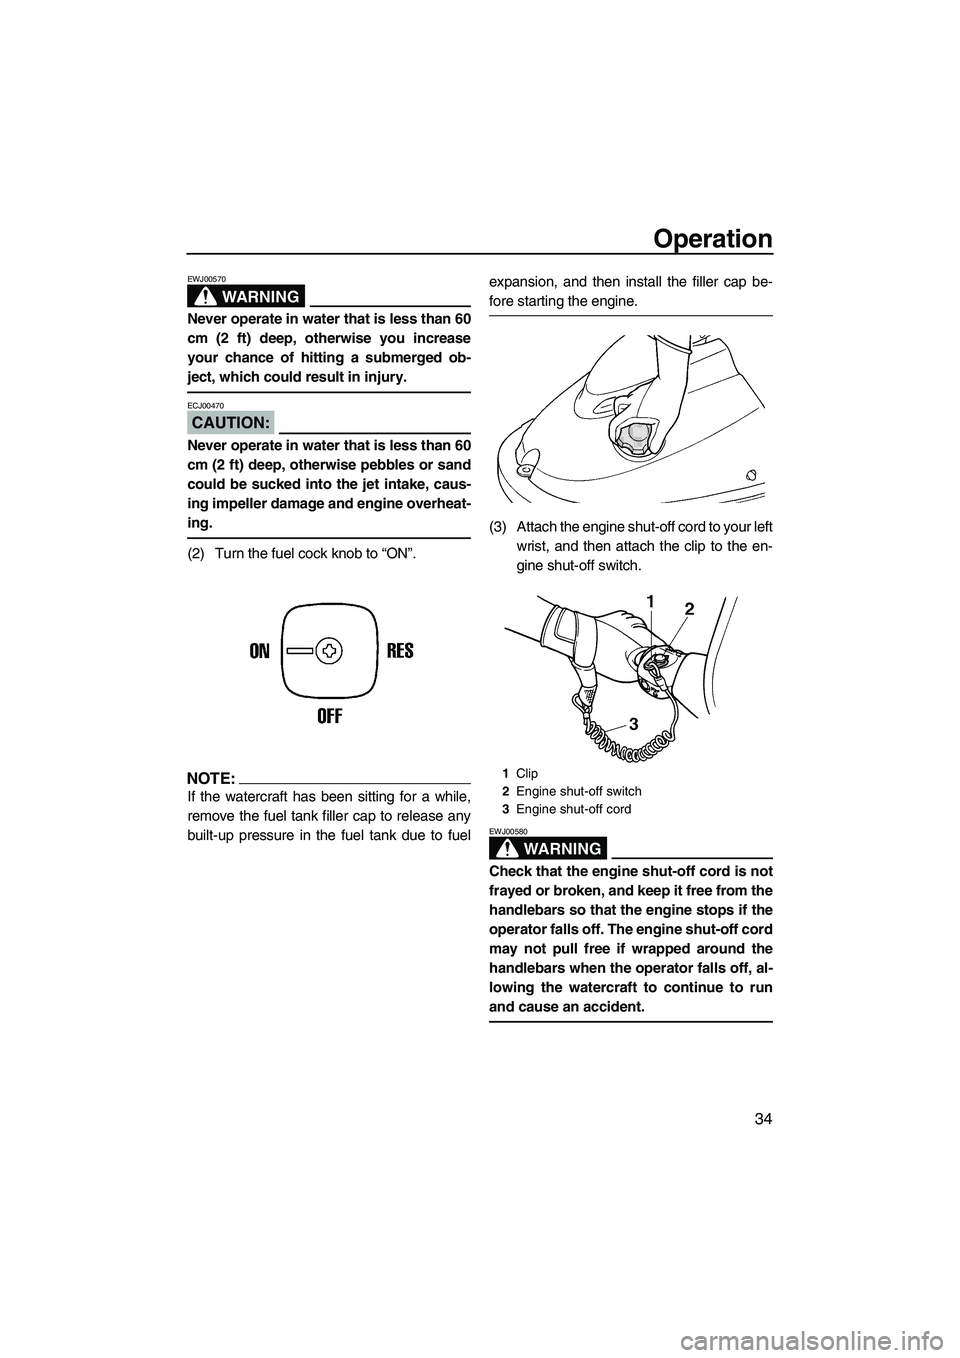 YAMAHA SUPERJET 2007  Owners Manual Operation
34
WARNING
EWJ00570
Never operate in water that is less than 60
cm (2 ft) deep, otherwise you increase
your chance of hitting a submerged ob-
ject, which could result in injury.
CAUTION:
ECJ